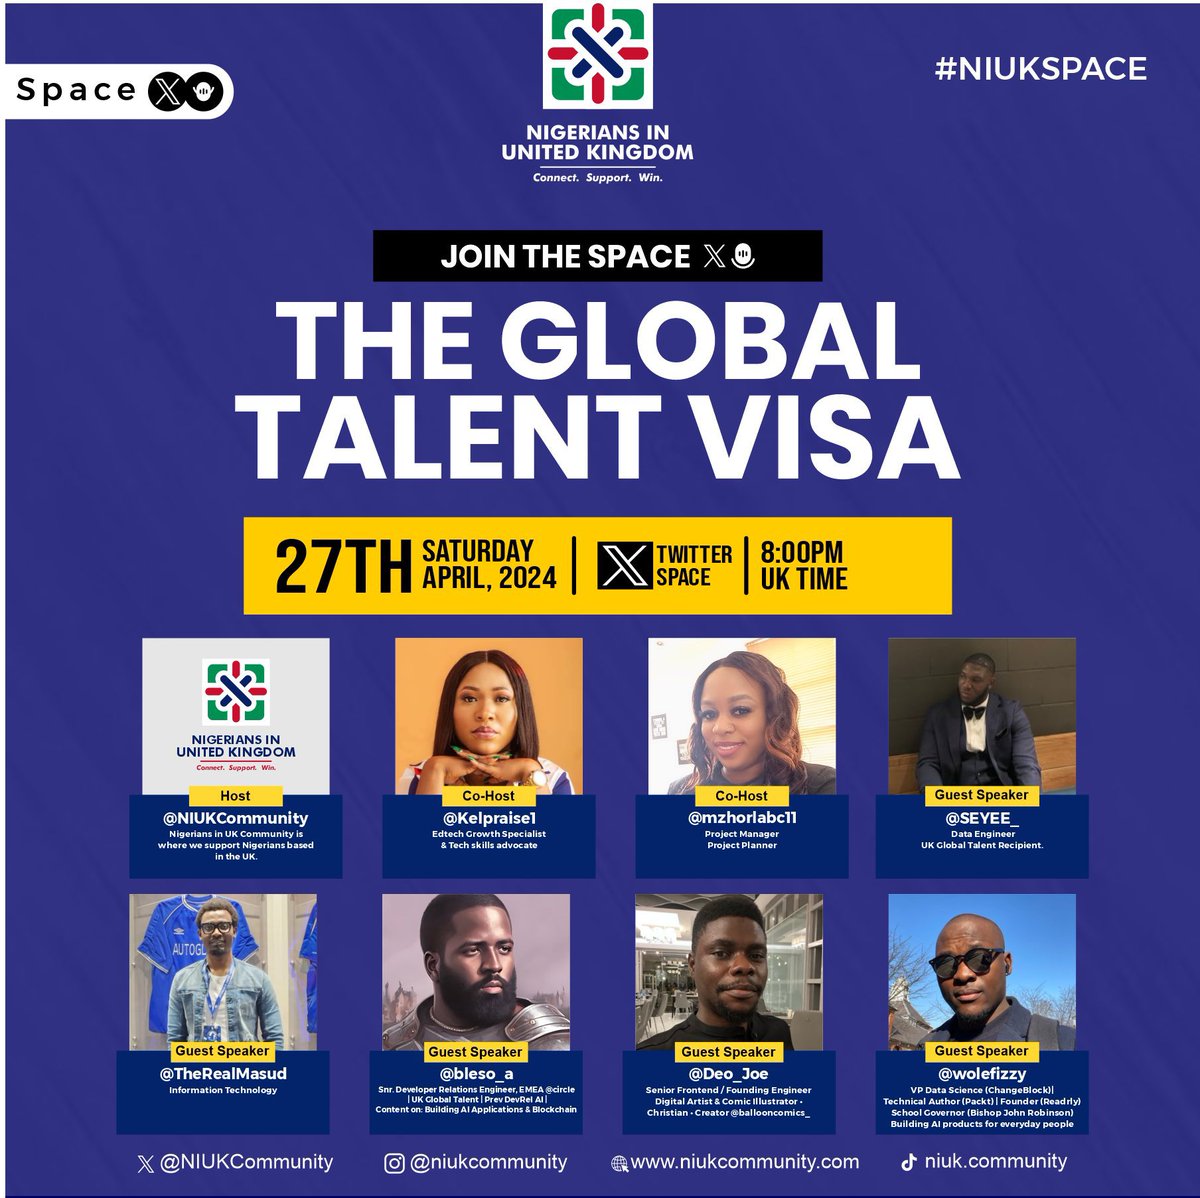 Have you heard about the Global Talent Visa but need more insight on exploring this settlement route? Join us by 8pm tonight as we discuss the Global Talent Visa! twitter.com/i/spaces/1DXxy…